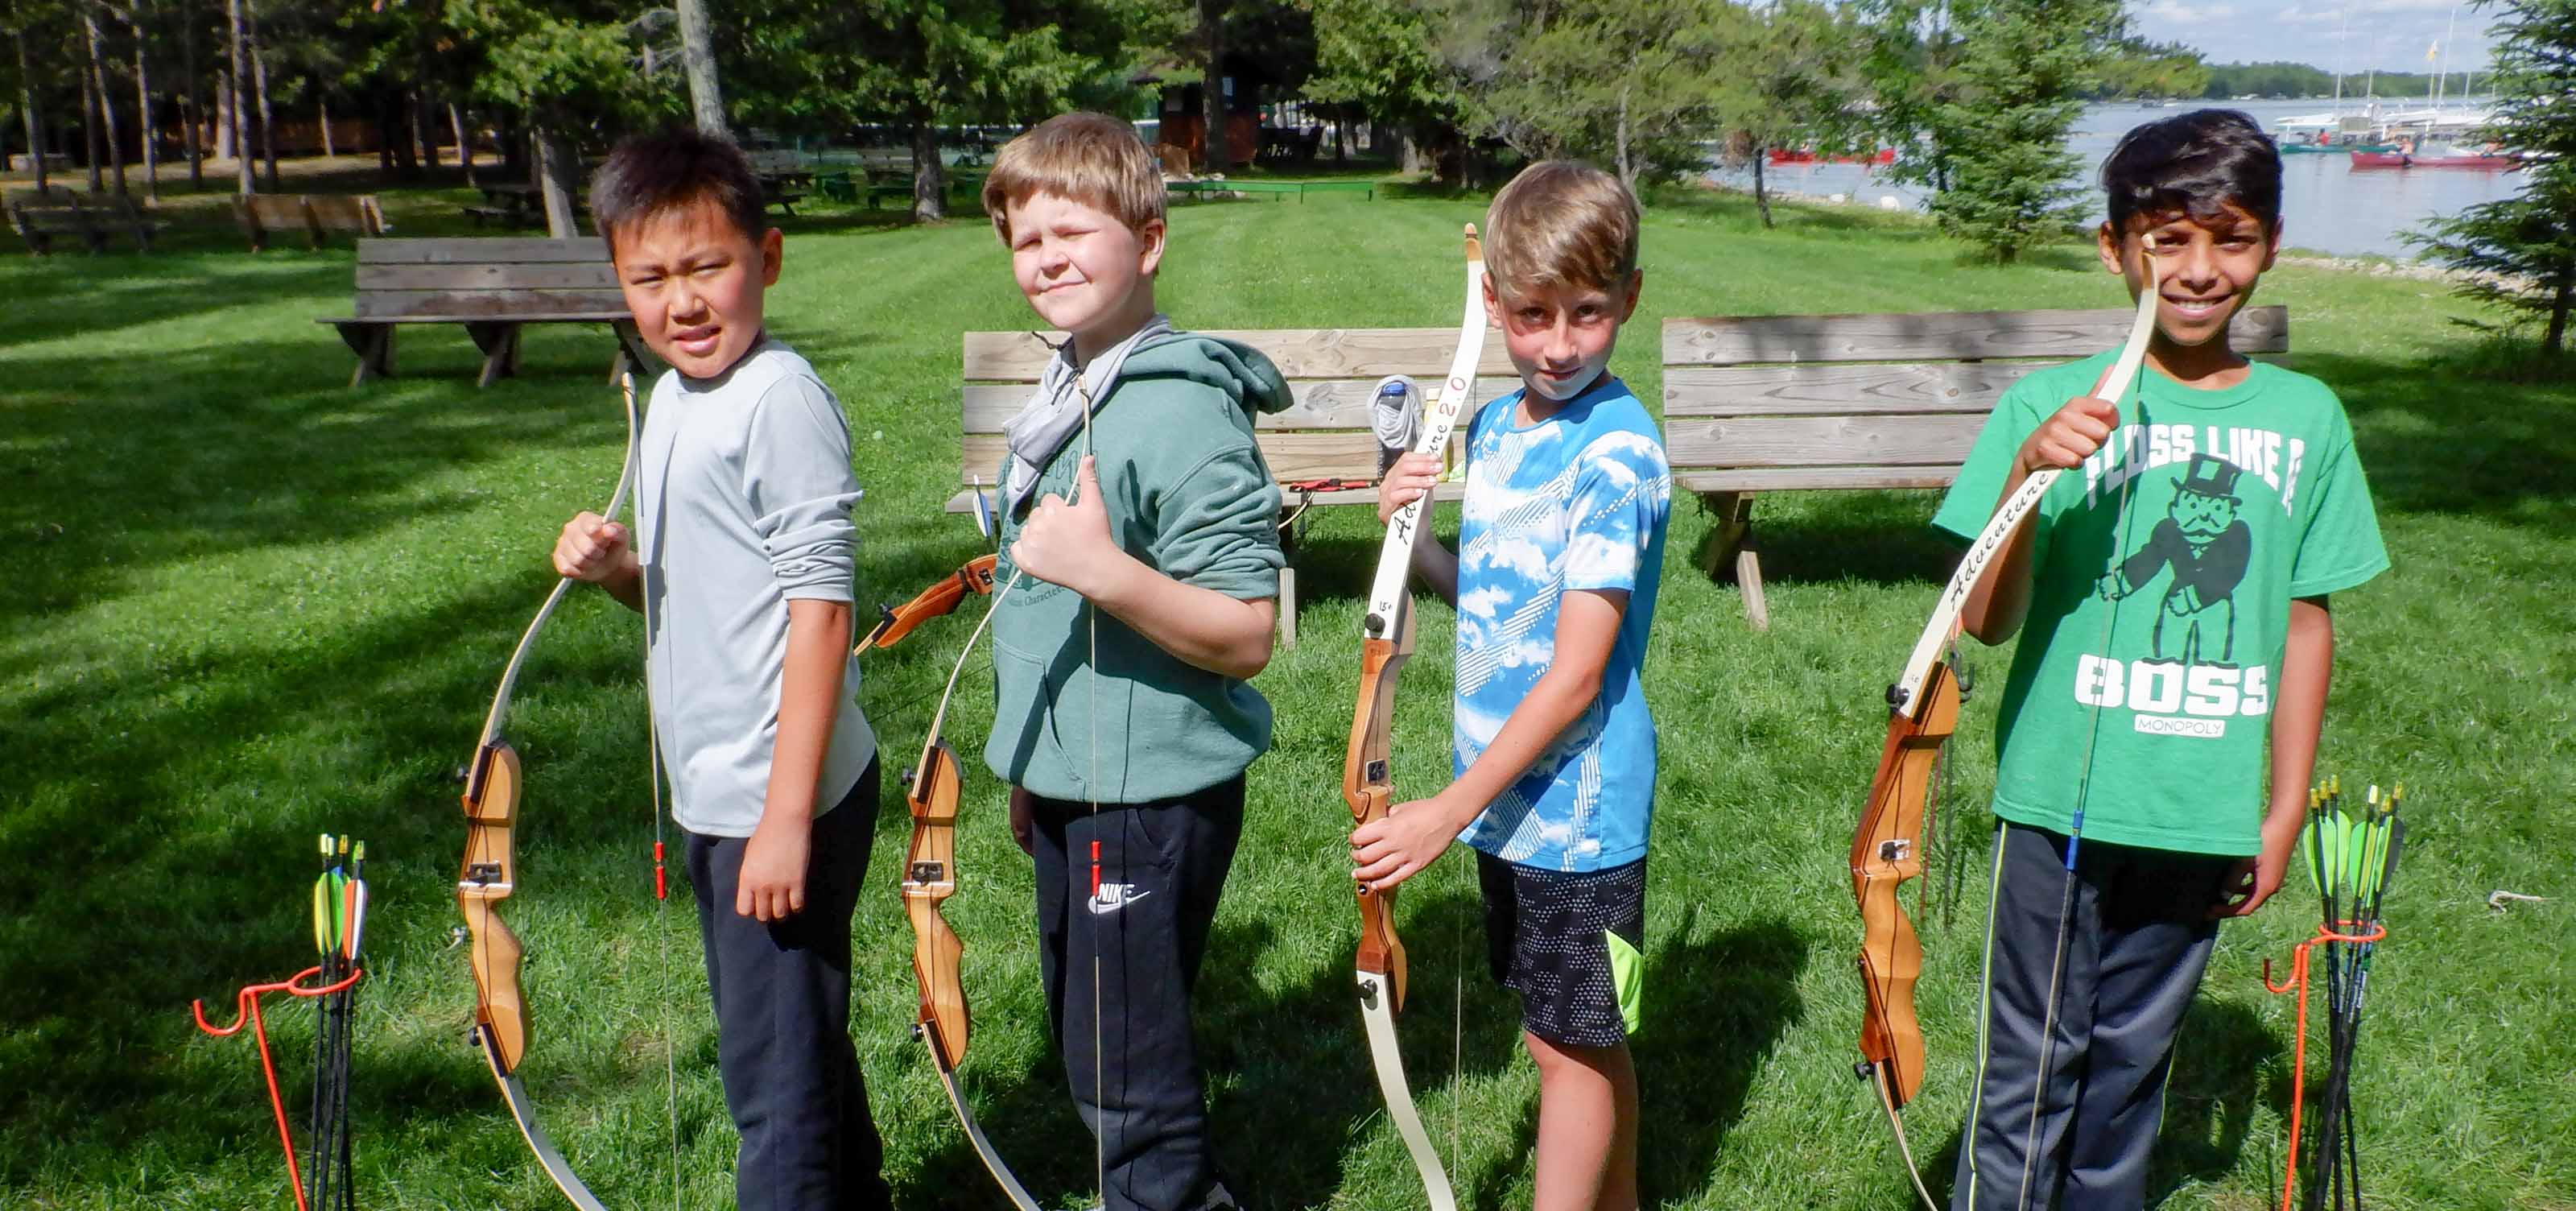 four boys with bows and arrows squinting in the sun.